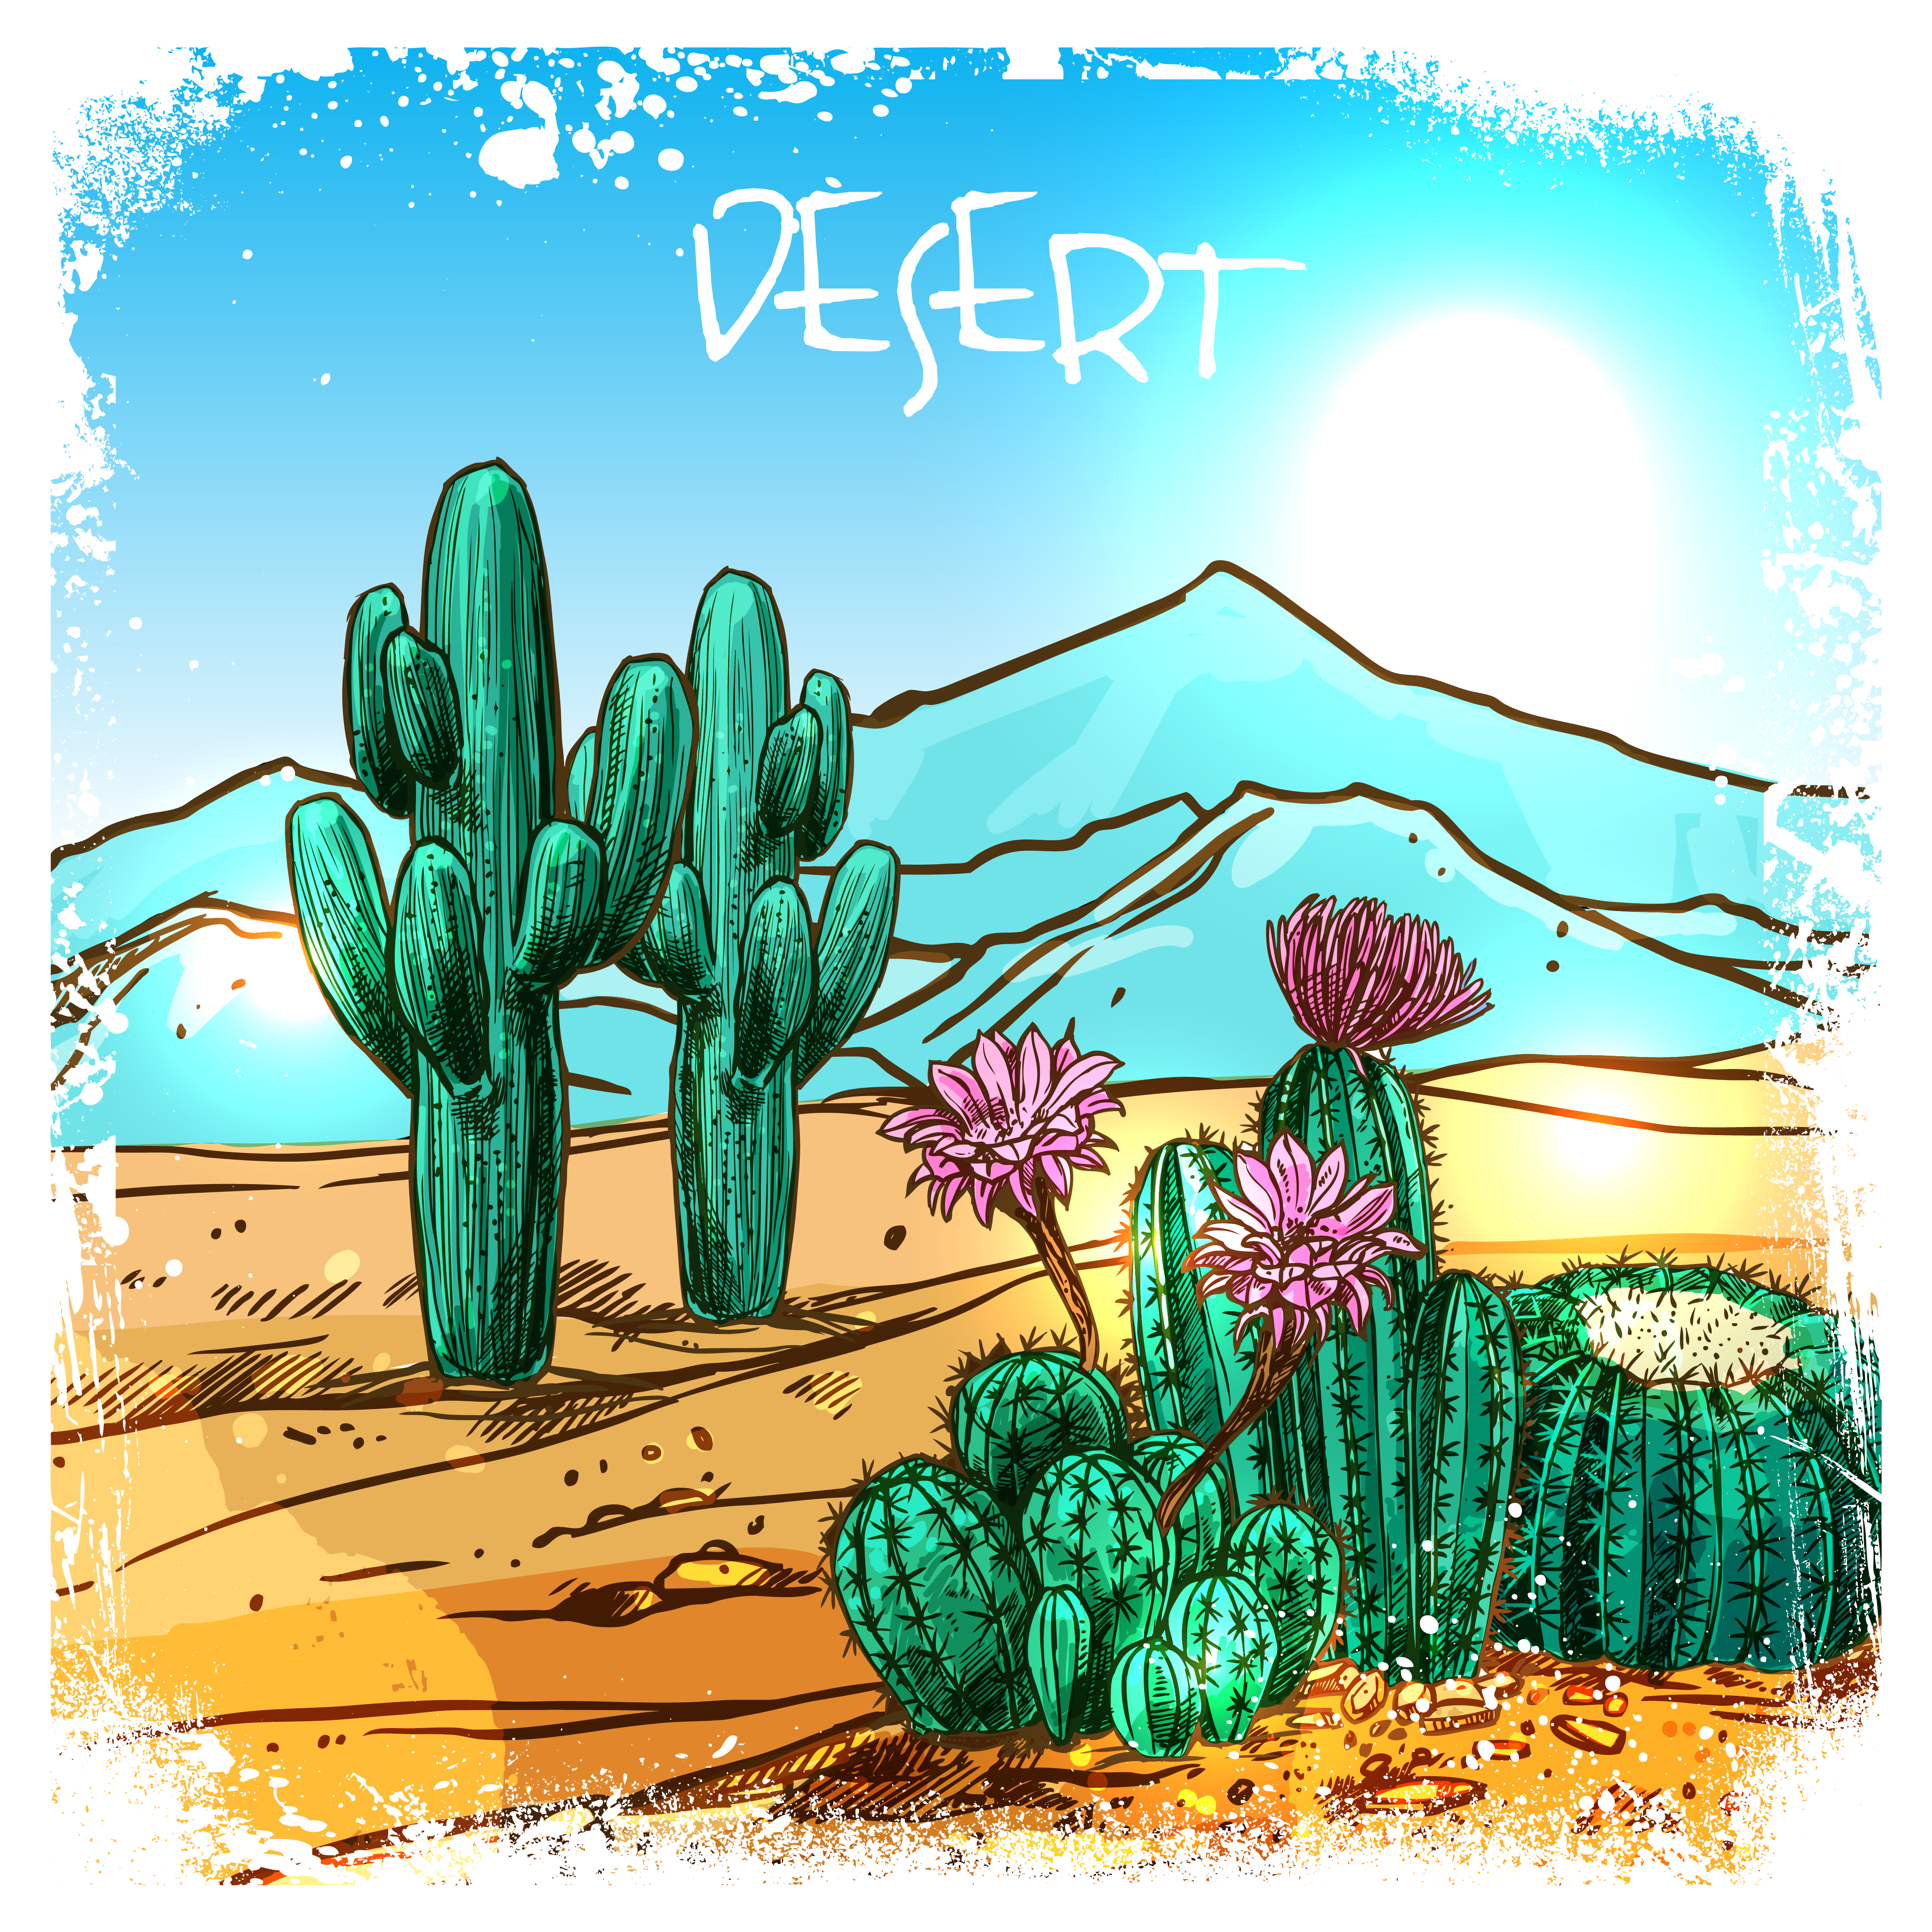 Sketch of the desert of America with cacti Prairie landscape Hand drawn  vector illustration  Stock Image  Everypixel